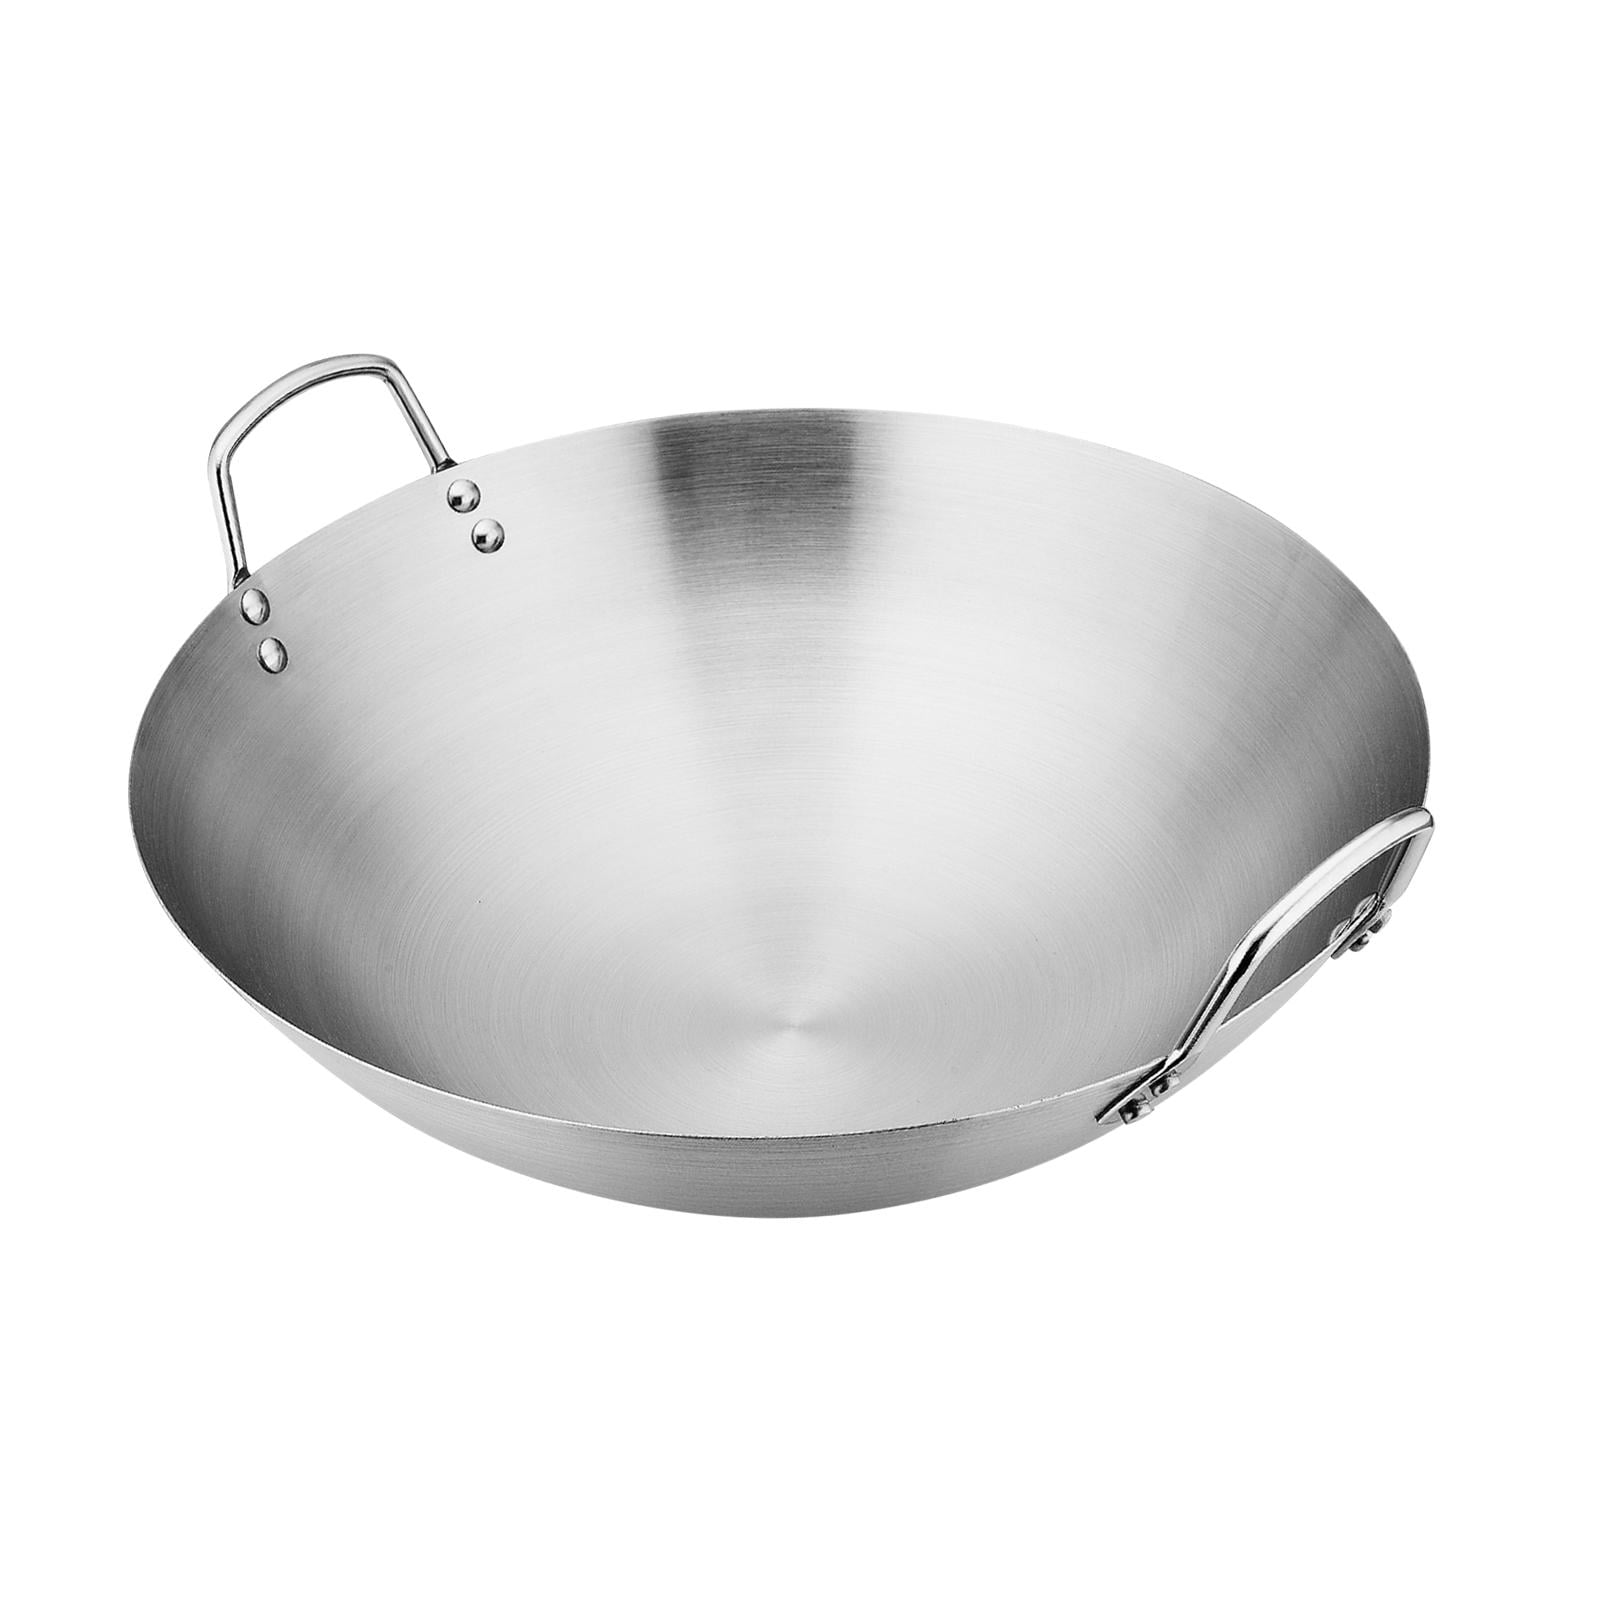 BESTonZON Polished Stainless Steel Wok, 10 Inch Round Bottom Wok with 2  Loop Handles, Large Capacity Wok for Kitchen Home Restaurant